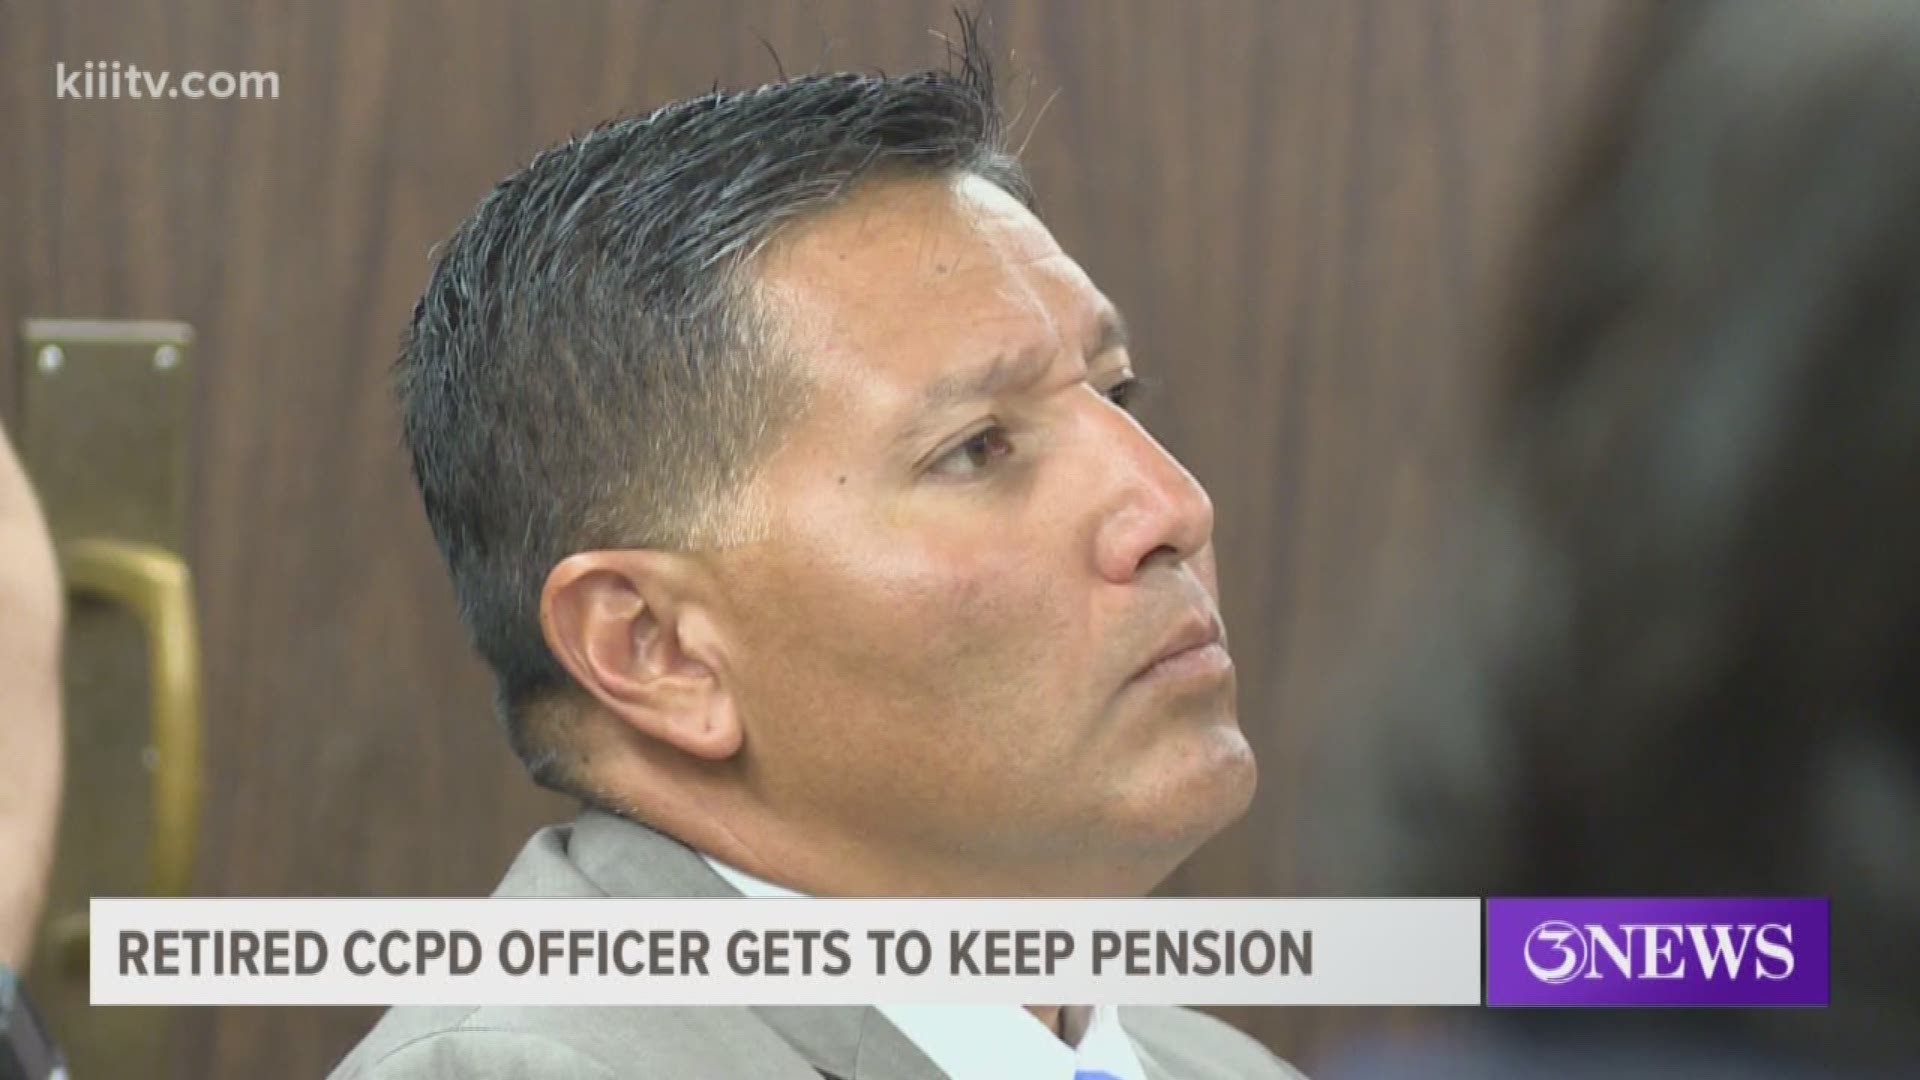 A district judge sentenced retired Corpus Christi police officer Tommy Cabello to 10 years in prison Tuesday after a jury found him guilty of domestic violence and tampering with evidence.